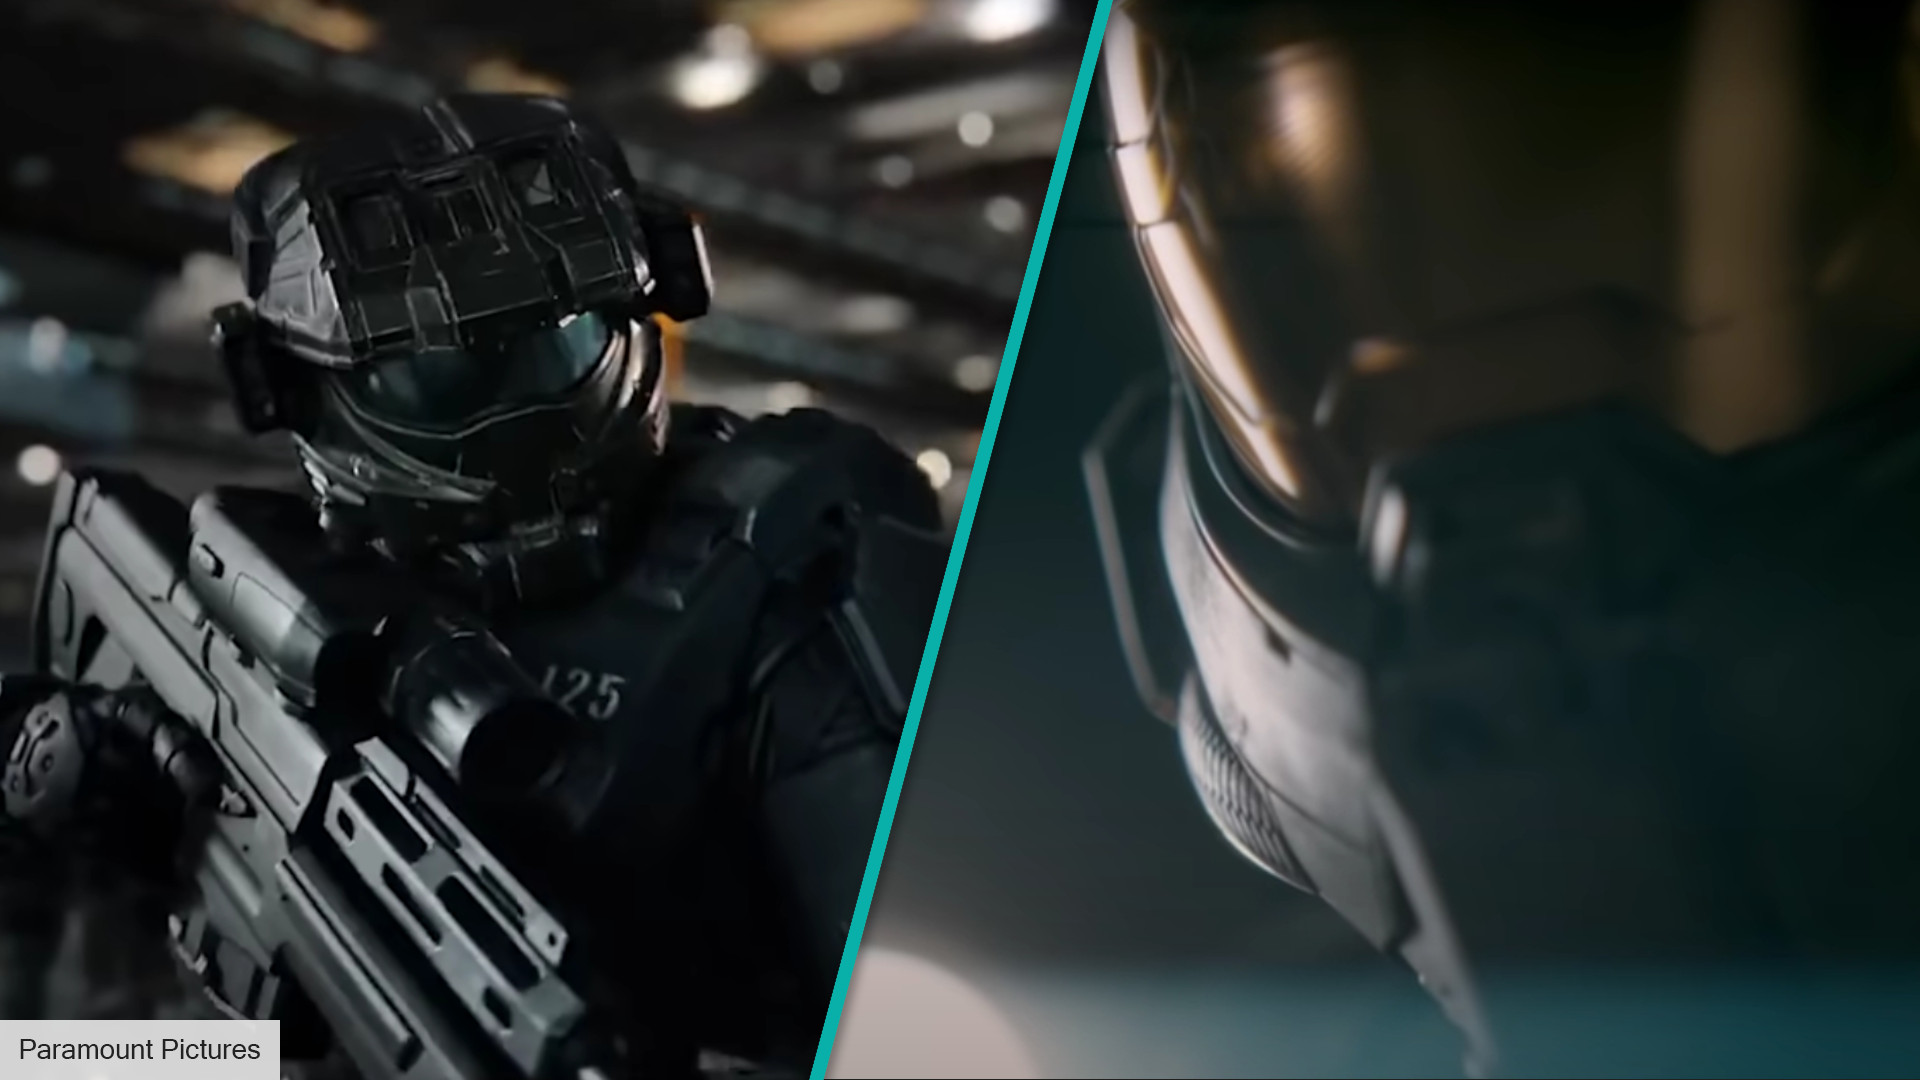 Watch the new Halo TV show trailer here